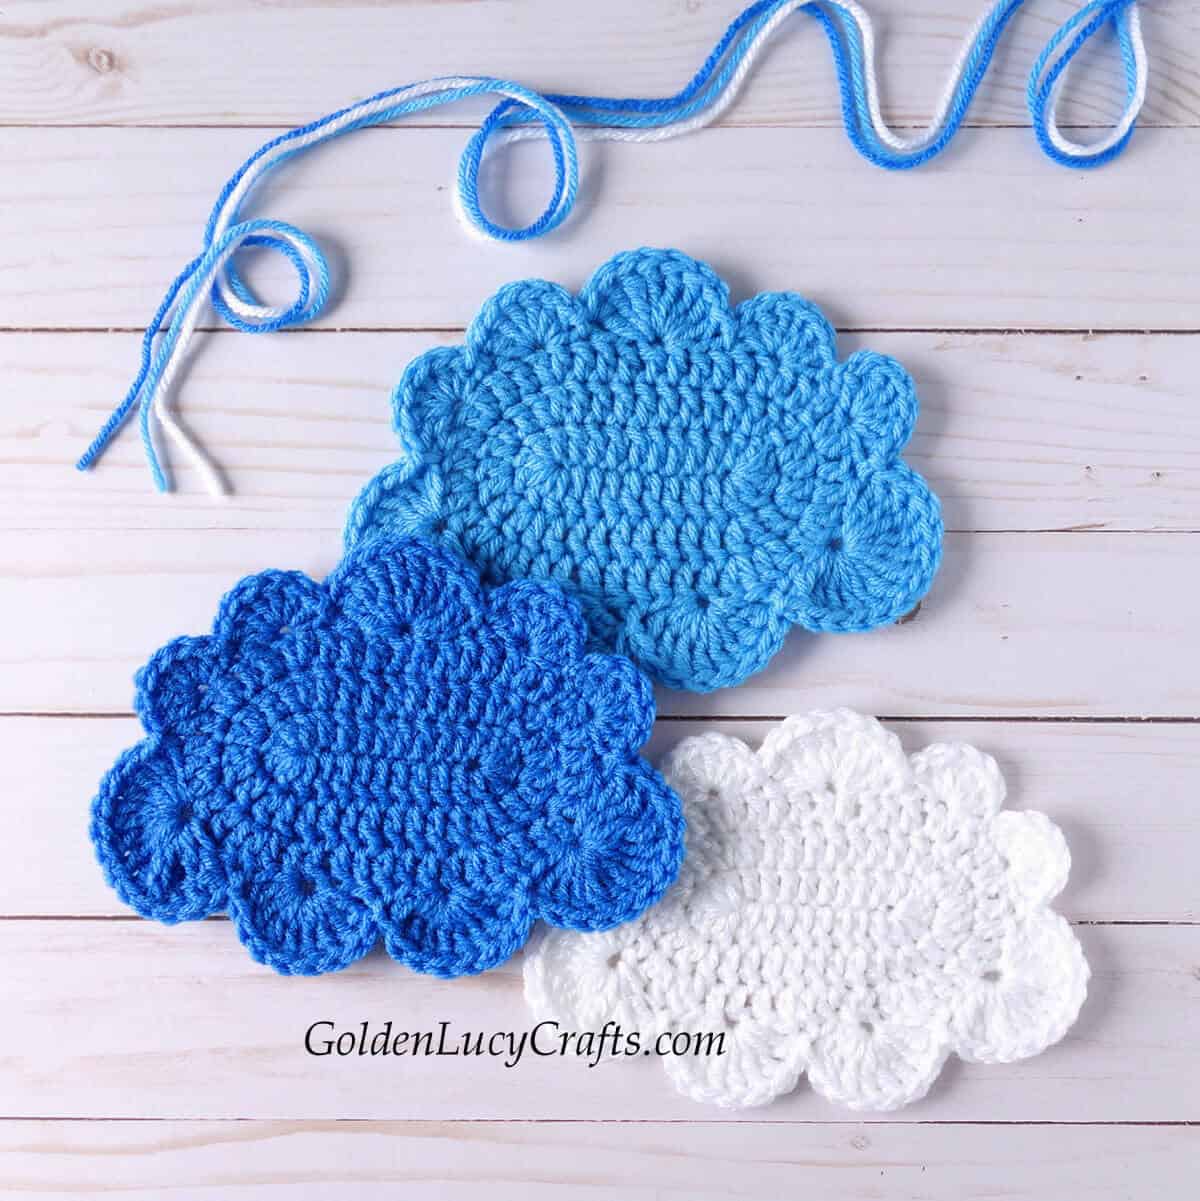 Three crocheted cloud appliques in white, blue and light blue colors.